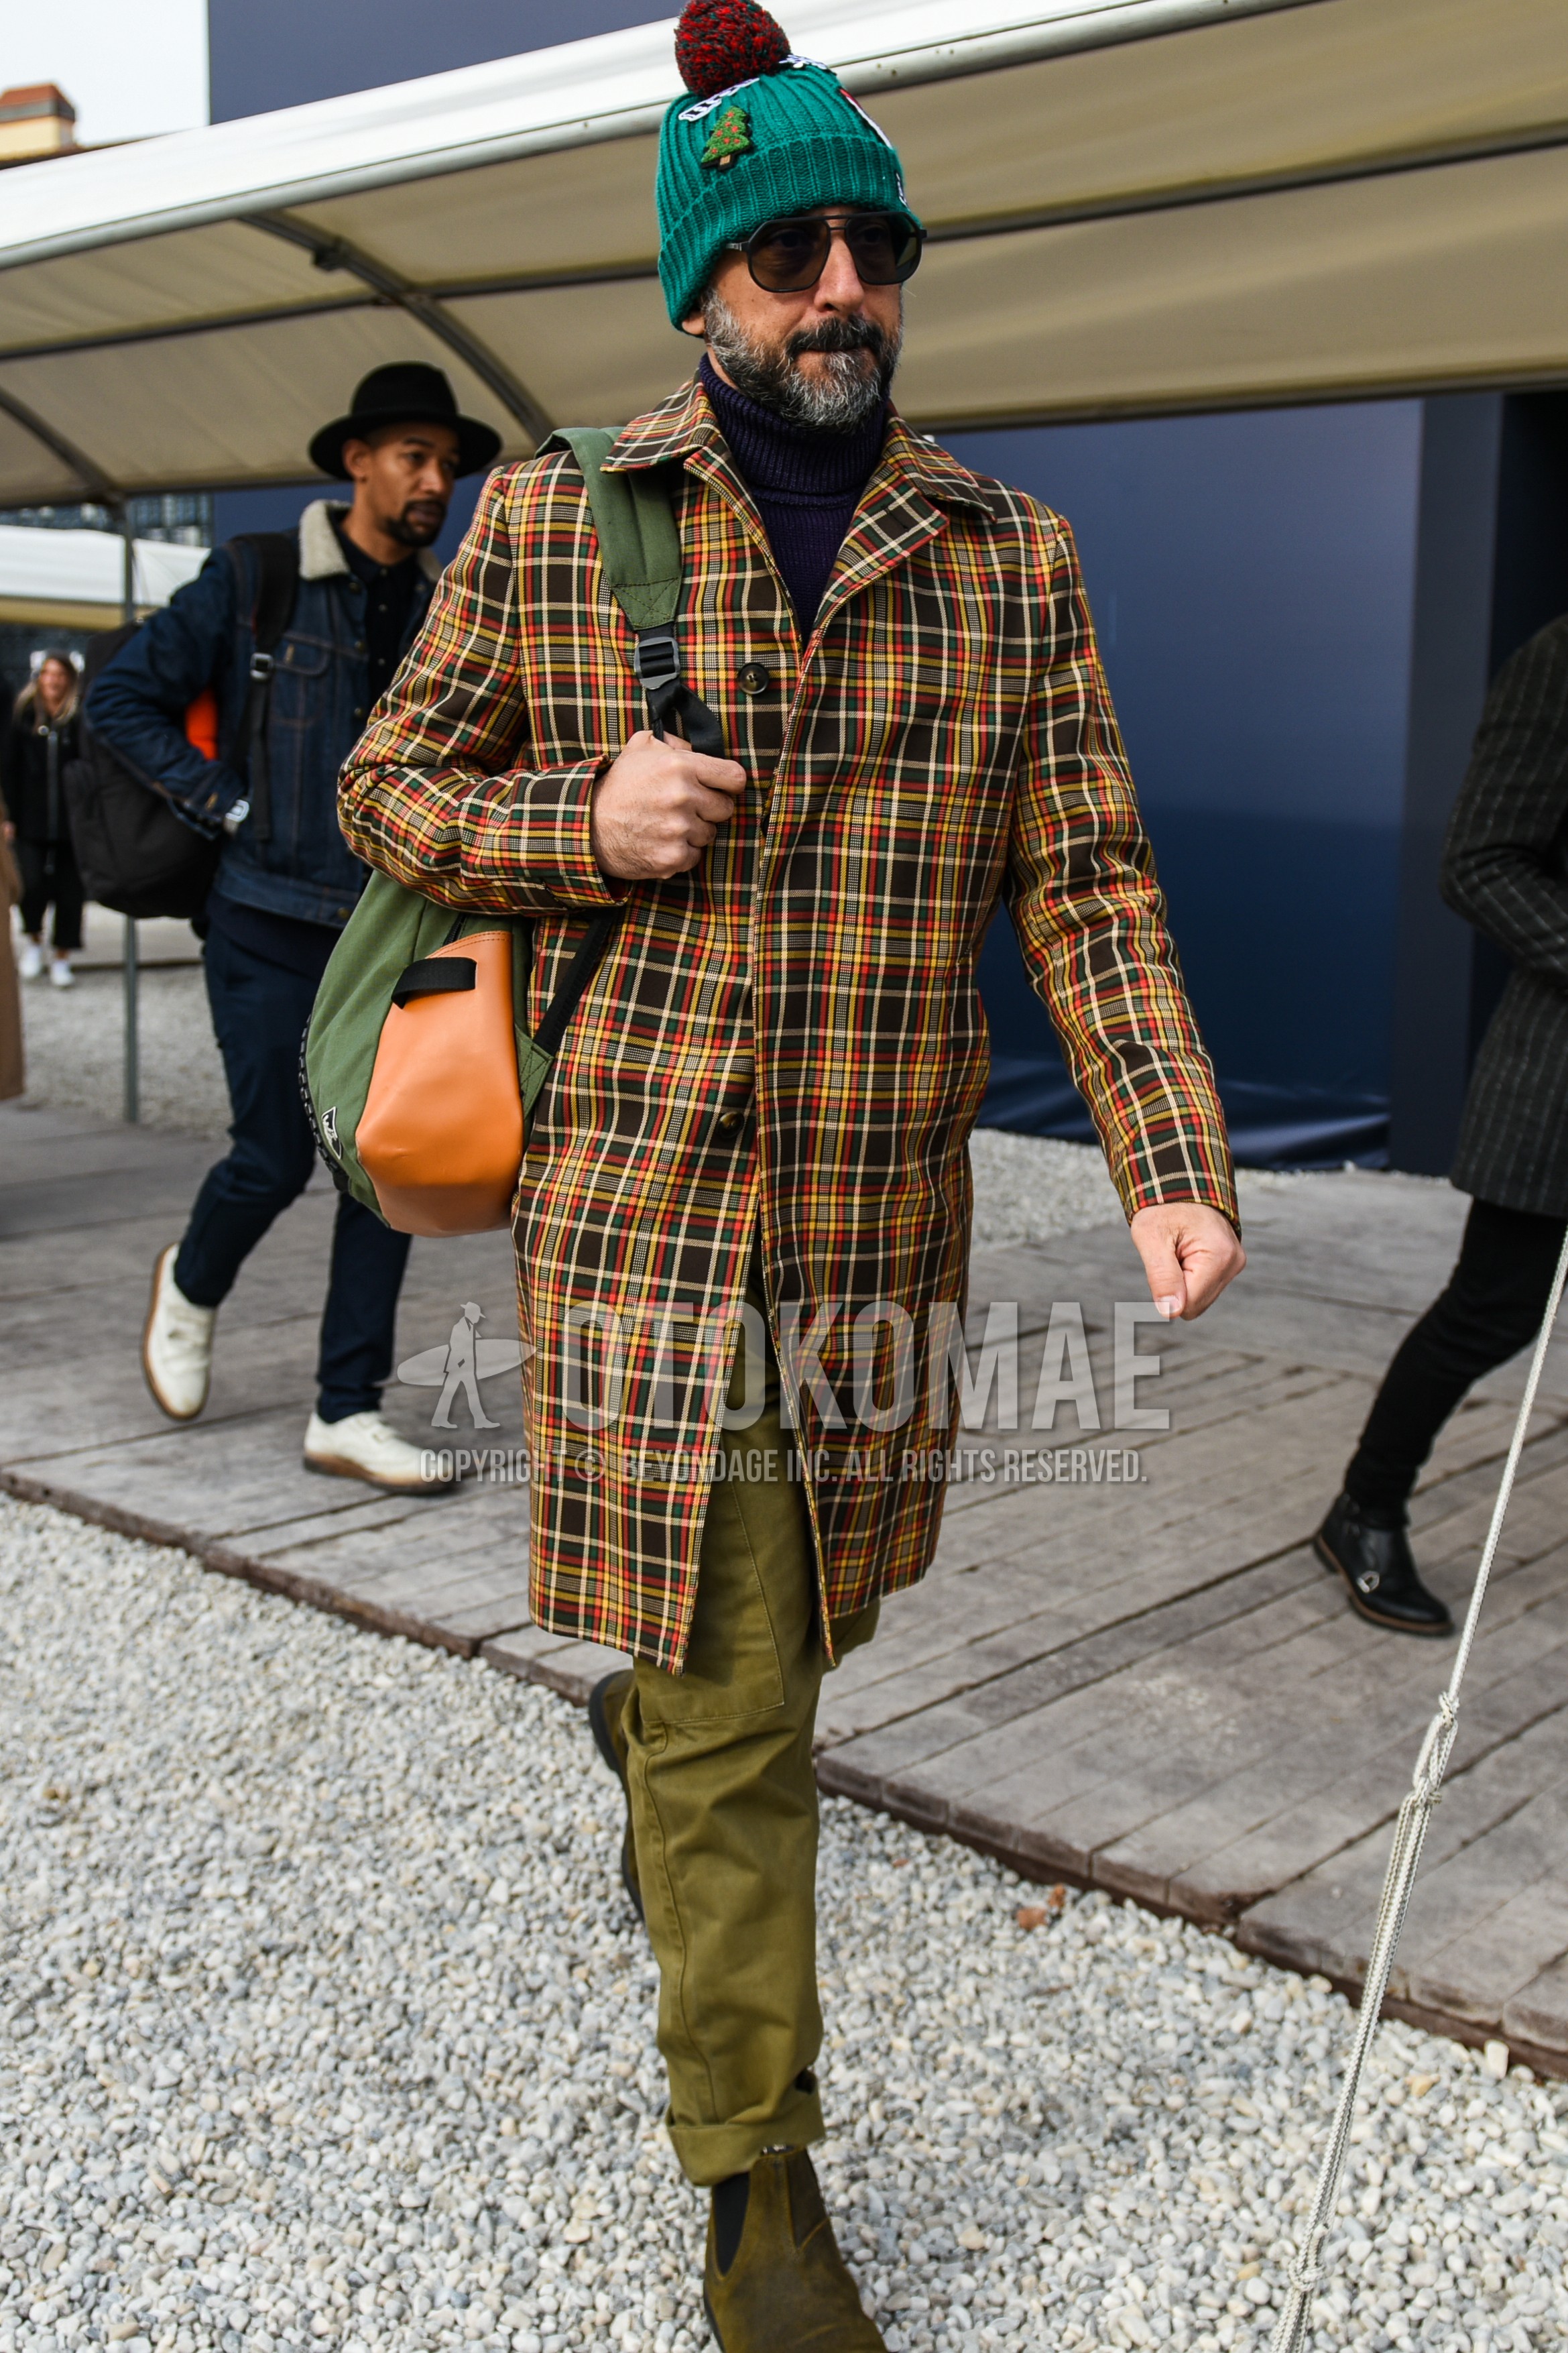 Men's autumn winter outfit with green plain knit cap, brown plain sunglasses, multi-color check stenkarrer coat, black plain turtleneck knit, olive green plain chinos, brown side-gore boots, olive green plain backpack.